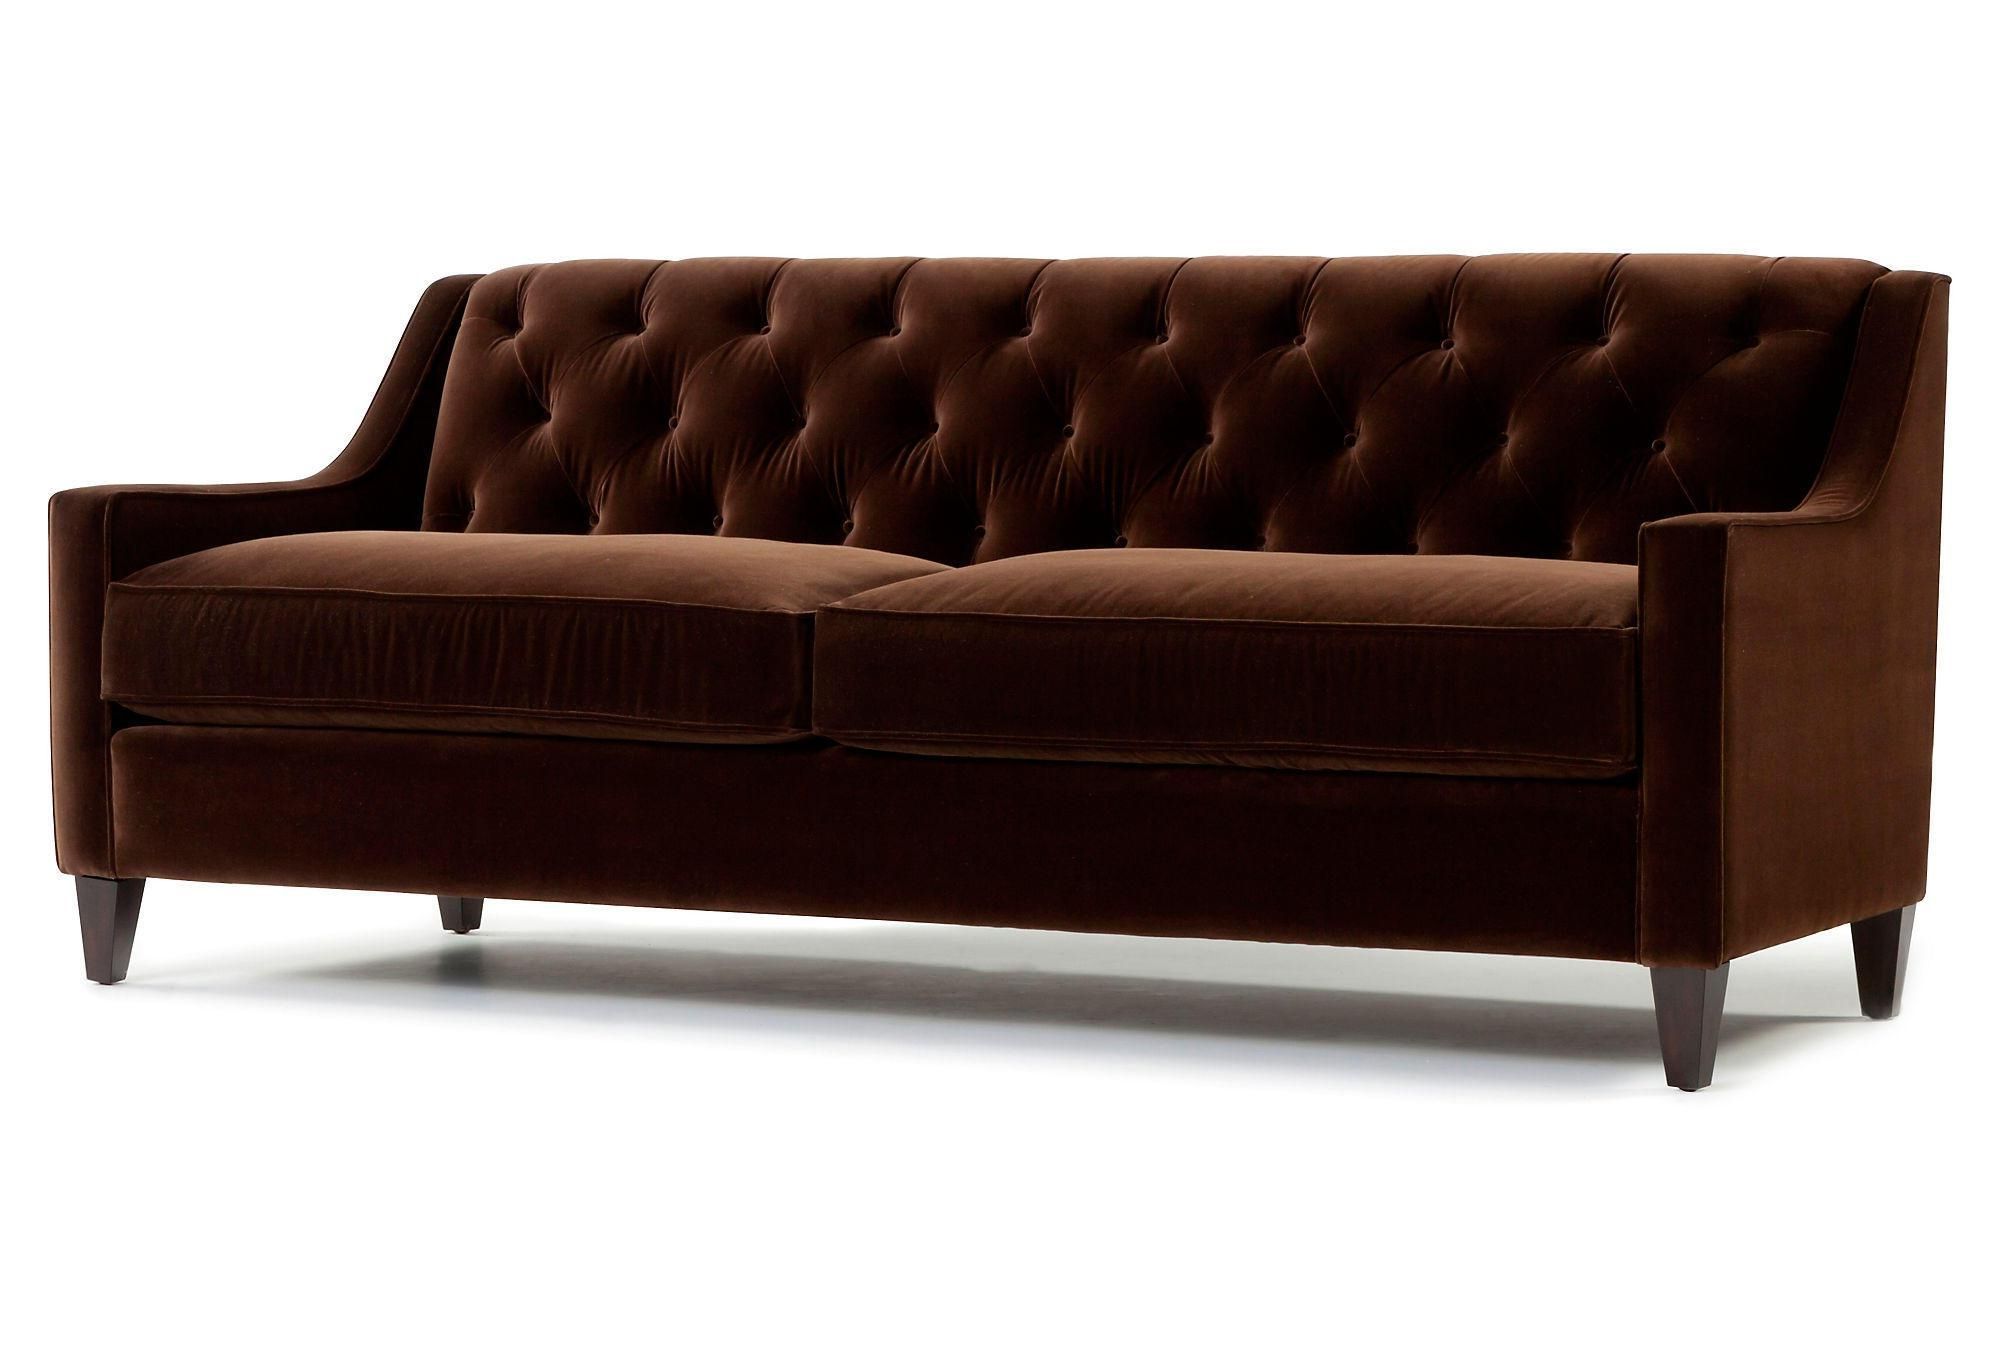 2021 Latest Brown Velvet Sofas | Sofa Ideas With Sofas In Chocolate Brown (View 15 of 20)